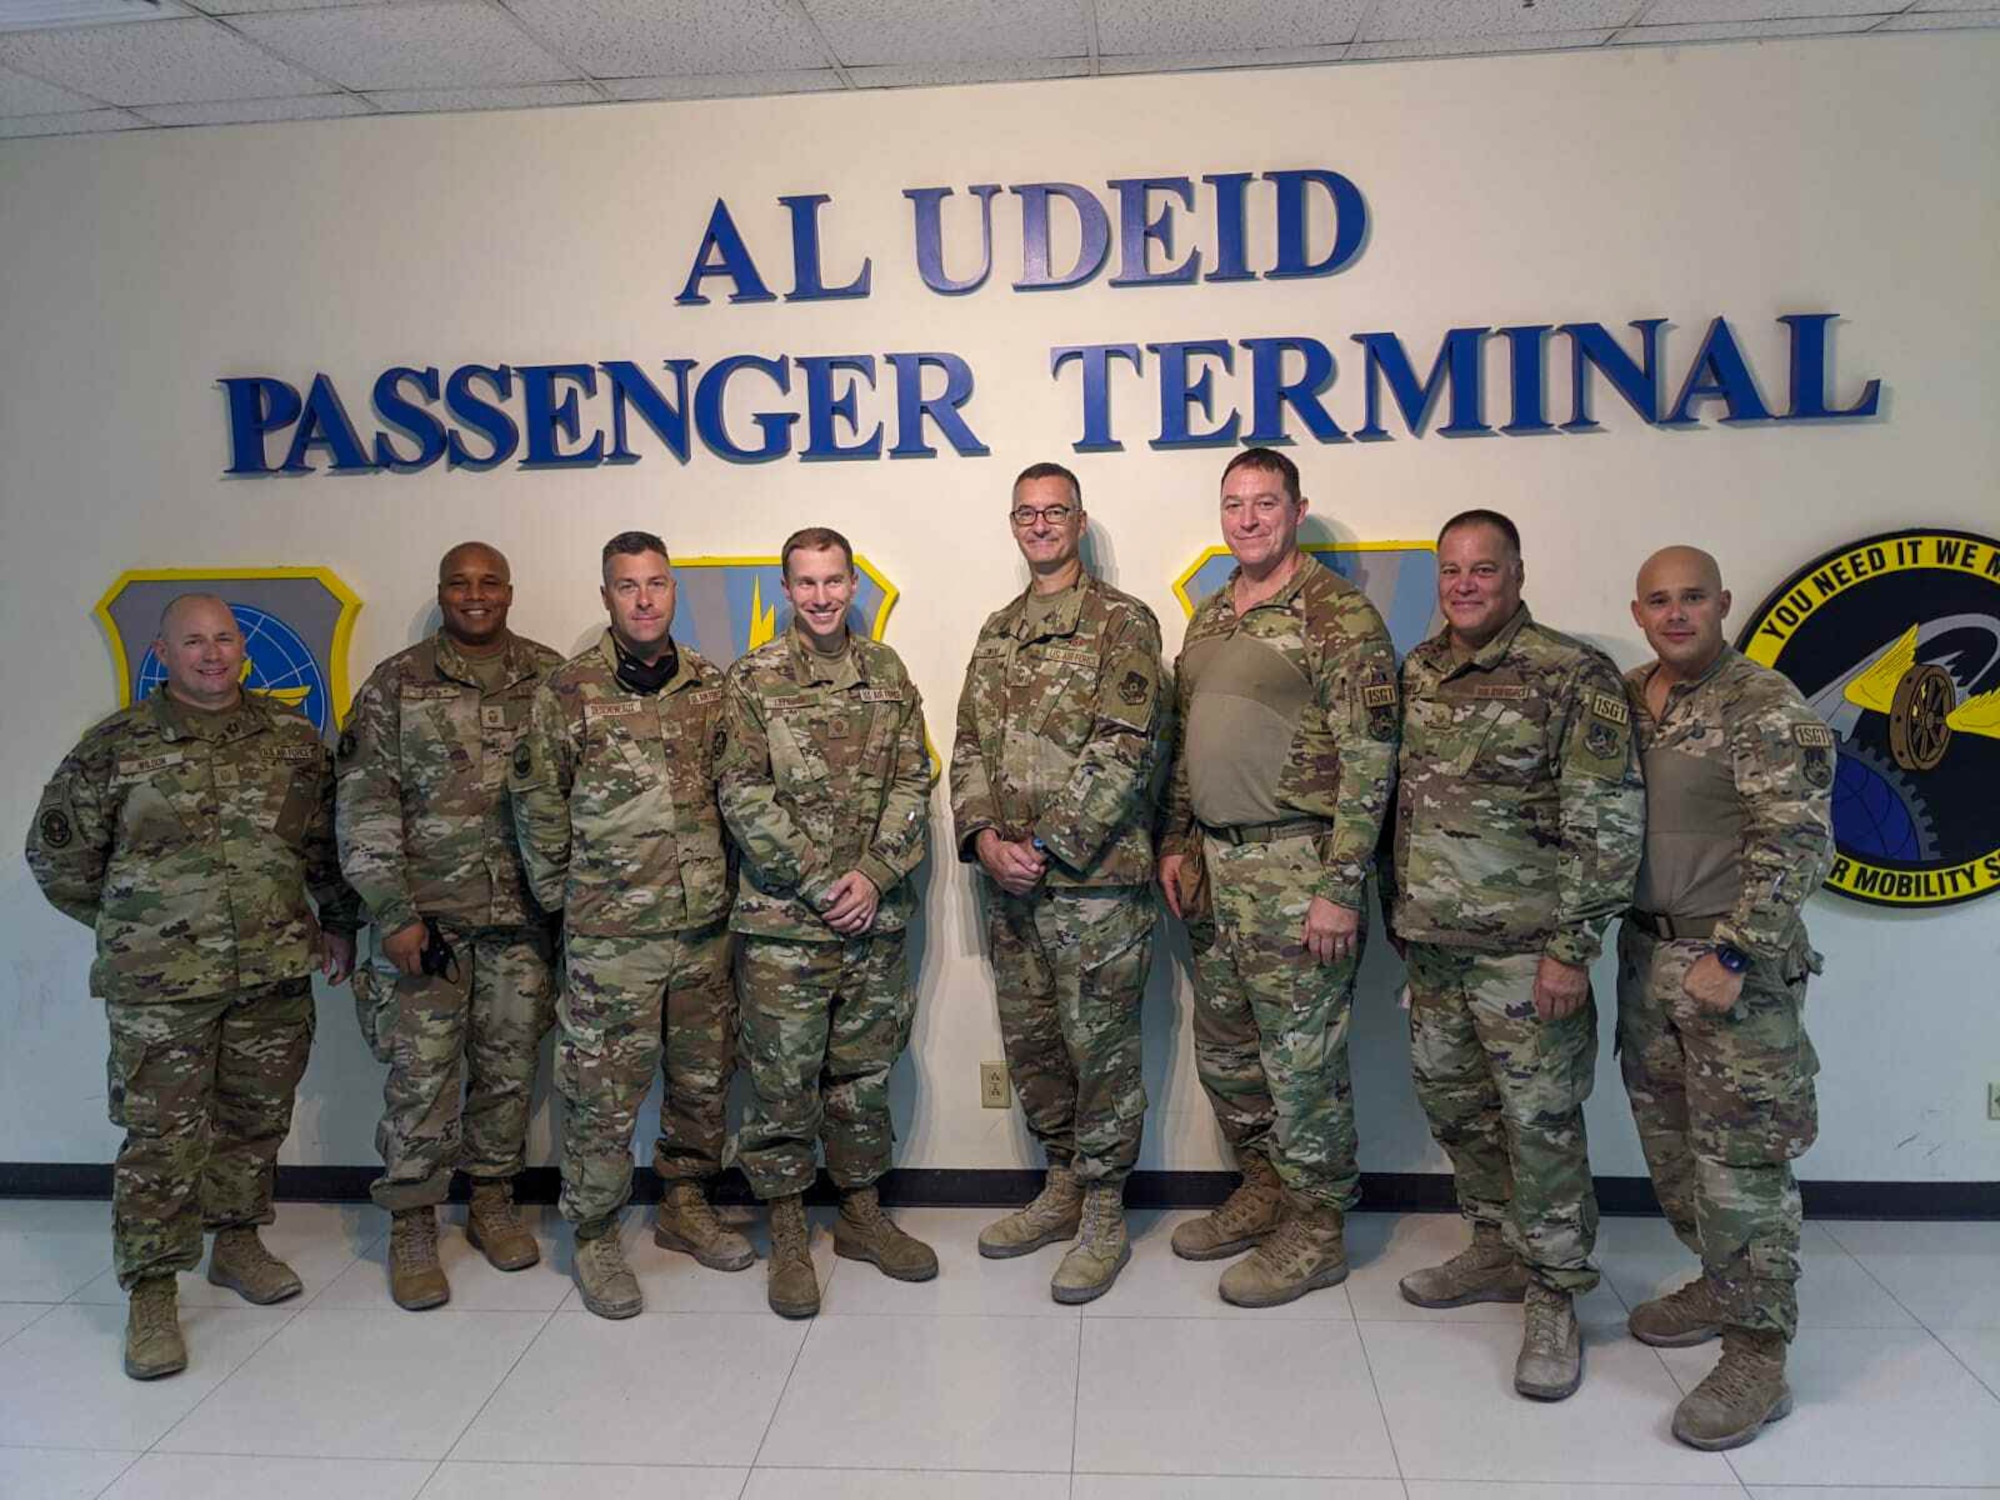 U.S. Air Force Senior Master Sgt. Byron Ball, 97th Civil Engineer Squadron deputy fire chief, and other first sergeants pose for a photo at Al Udeid Air Base, Qatar, during Operation Allies Refuge. While at Al Udeid Air Base, the first sergeants helped with the health and welfare of over 1,000 personnel and 60,000 refugees across nine operating locations. (U.S. Air Force courtesy photo by Senior Master Sgt. Byron Ball)